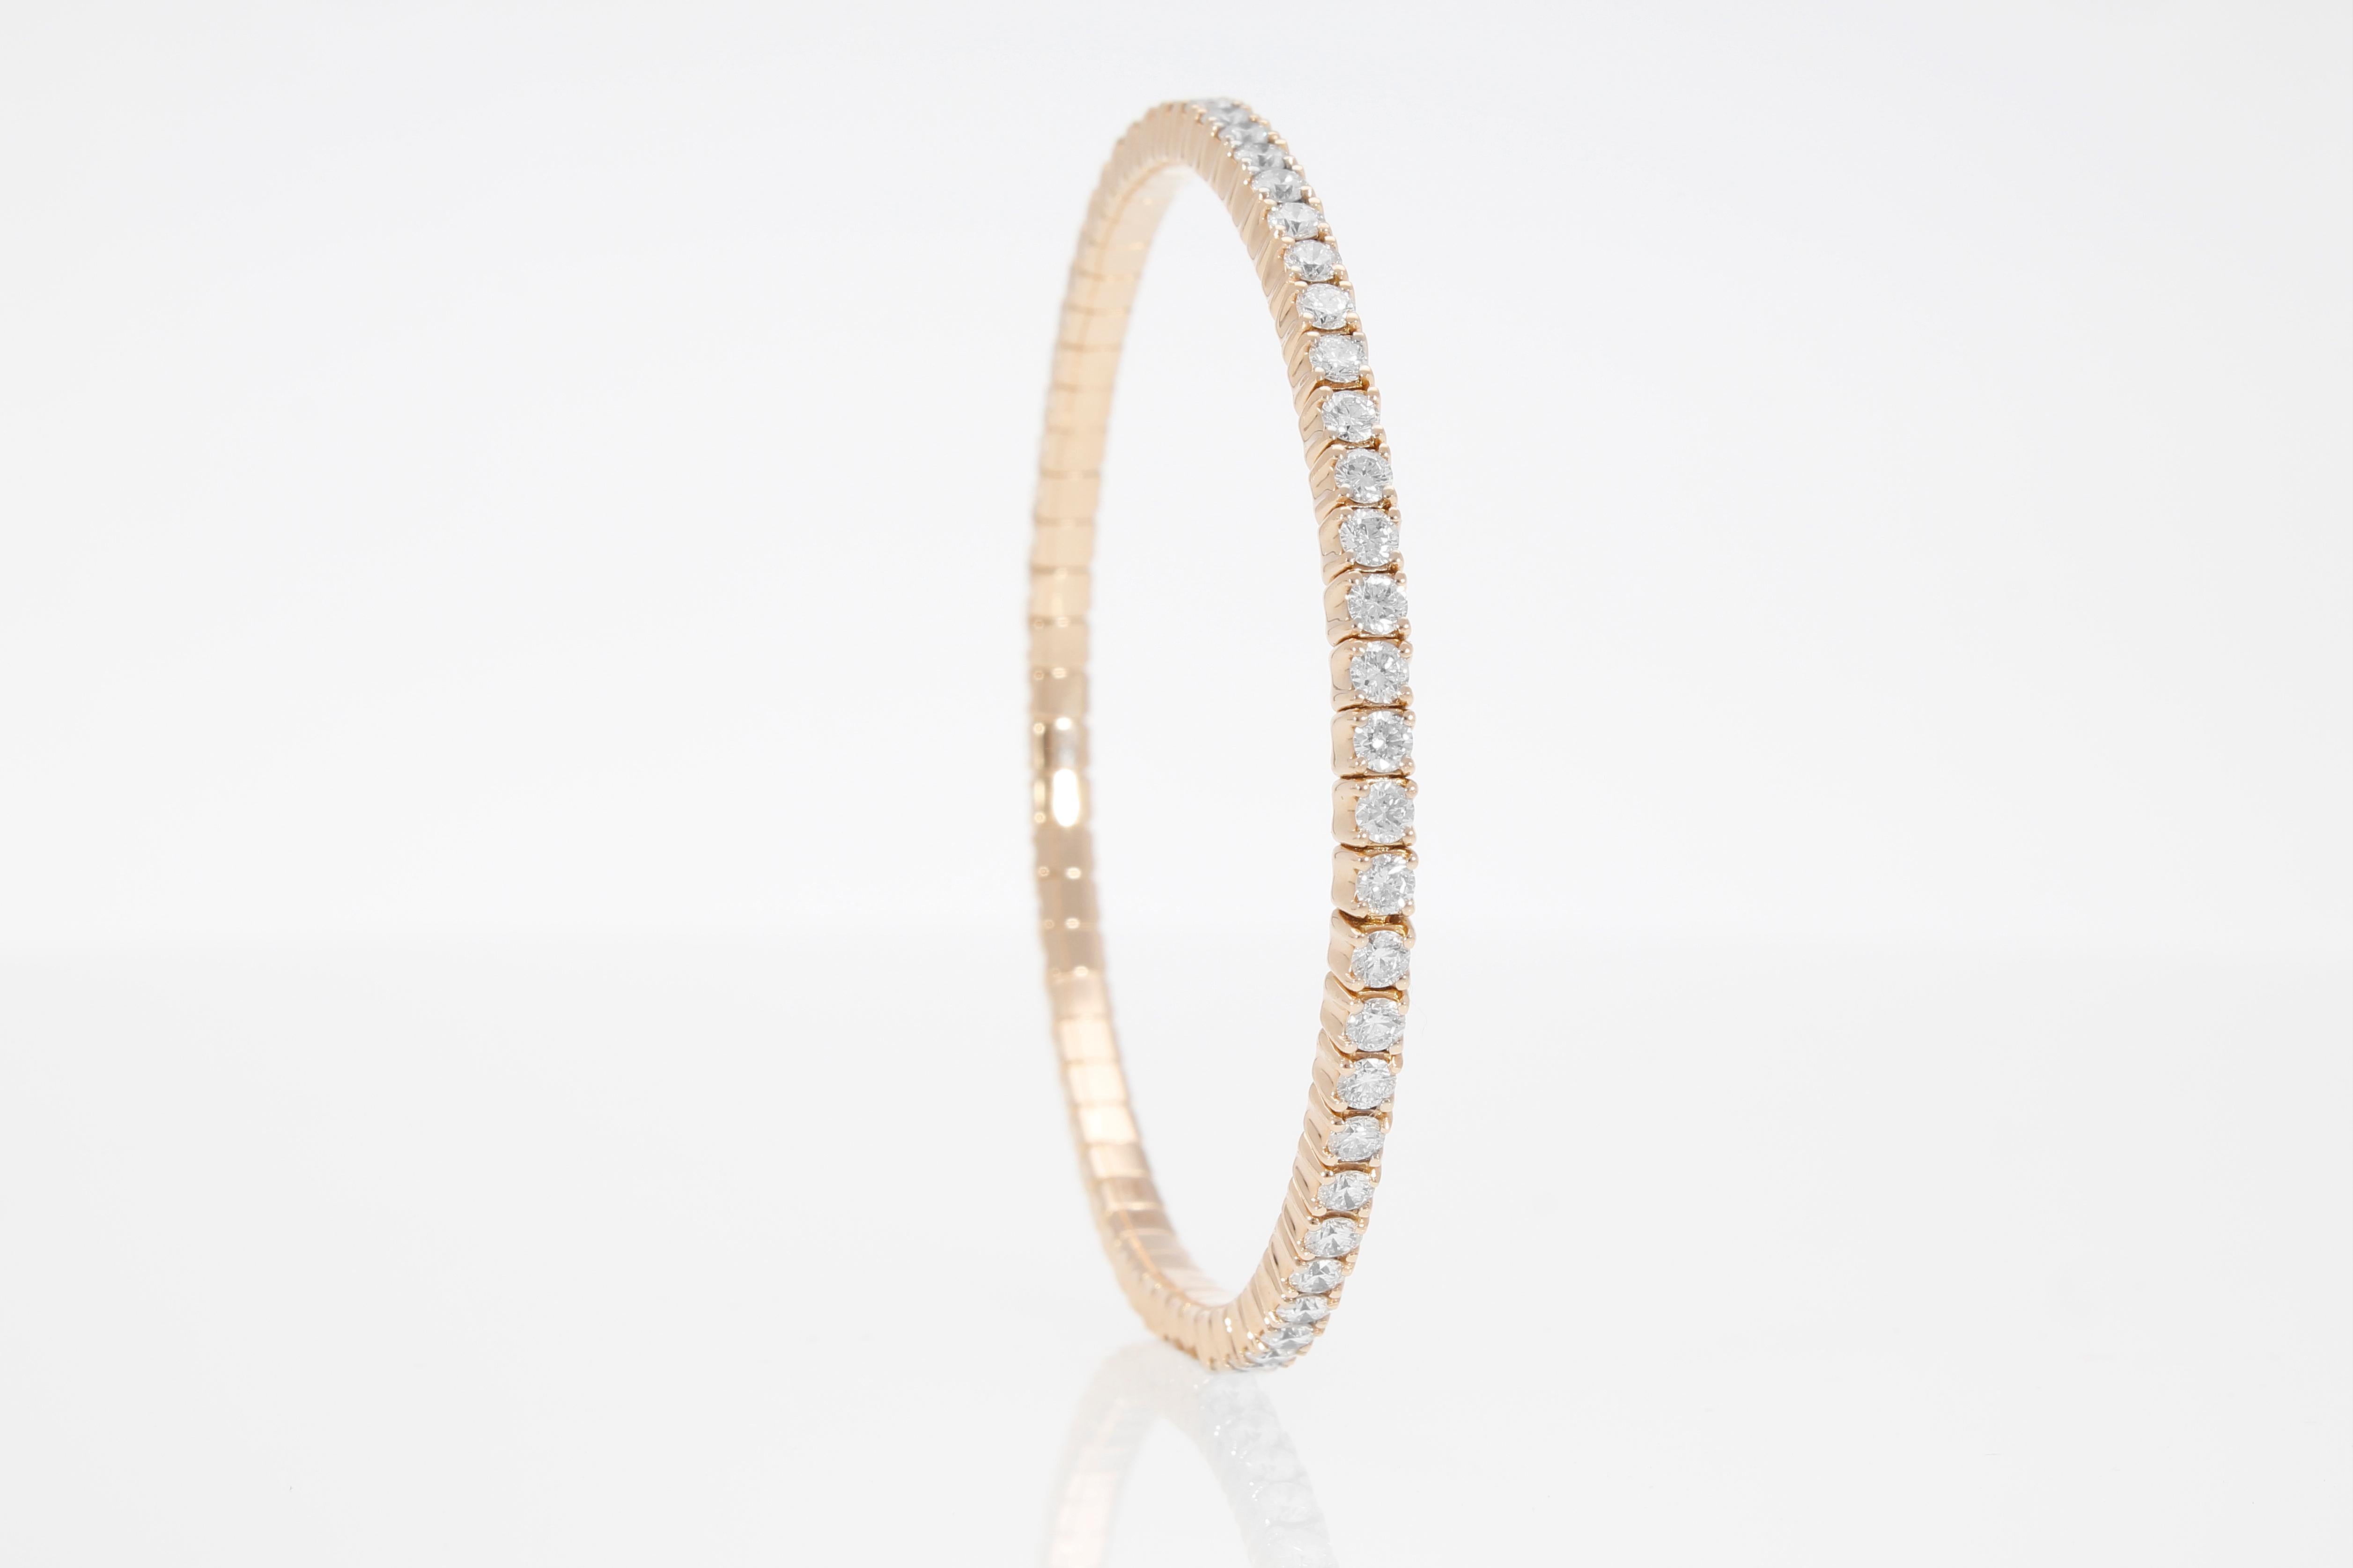 Elastic tennis bracelet with 64 diamonds for a total weight of ct 4.11.
The bracelet has no closure as it is elastic.
The bracelet is in 18 Kt rose gold. 
Total weight: 14.3 grams
Total carat: ct 4.11
Number of diamonds: 64
The bracelet is